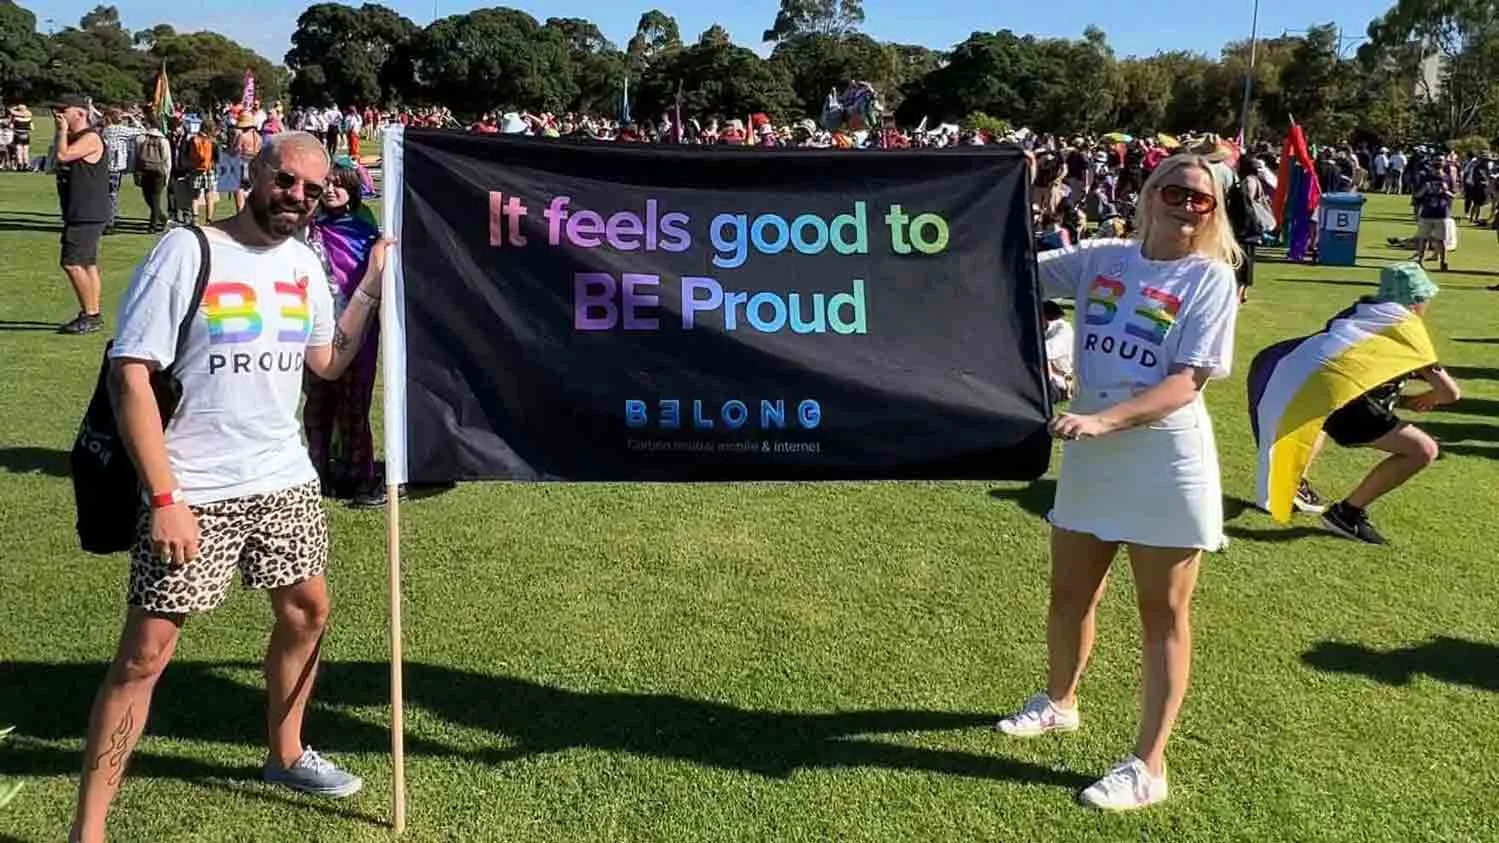 Jarrod and Hannah from Belong hold a sign that says “It feels good to BE Proud” in the marshall area of Midsumma Pride March.